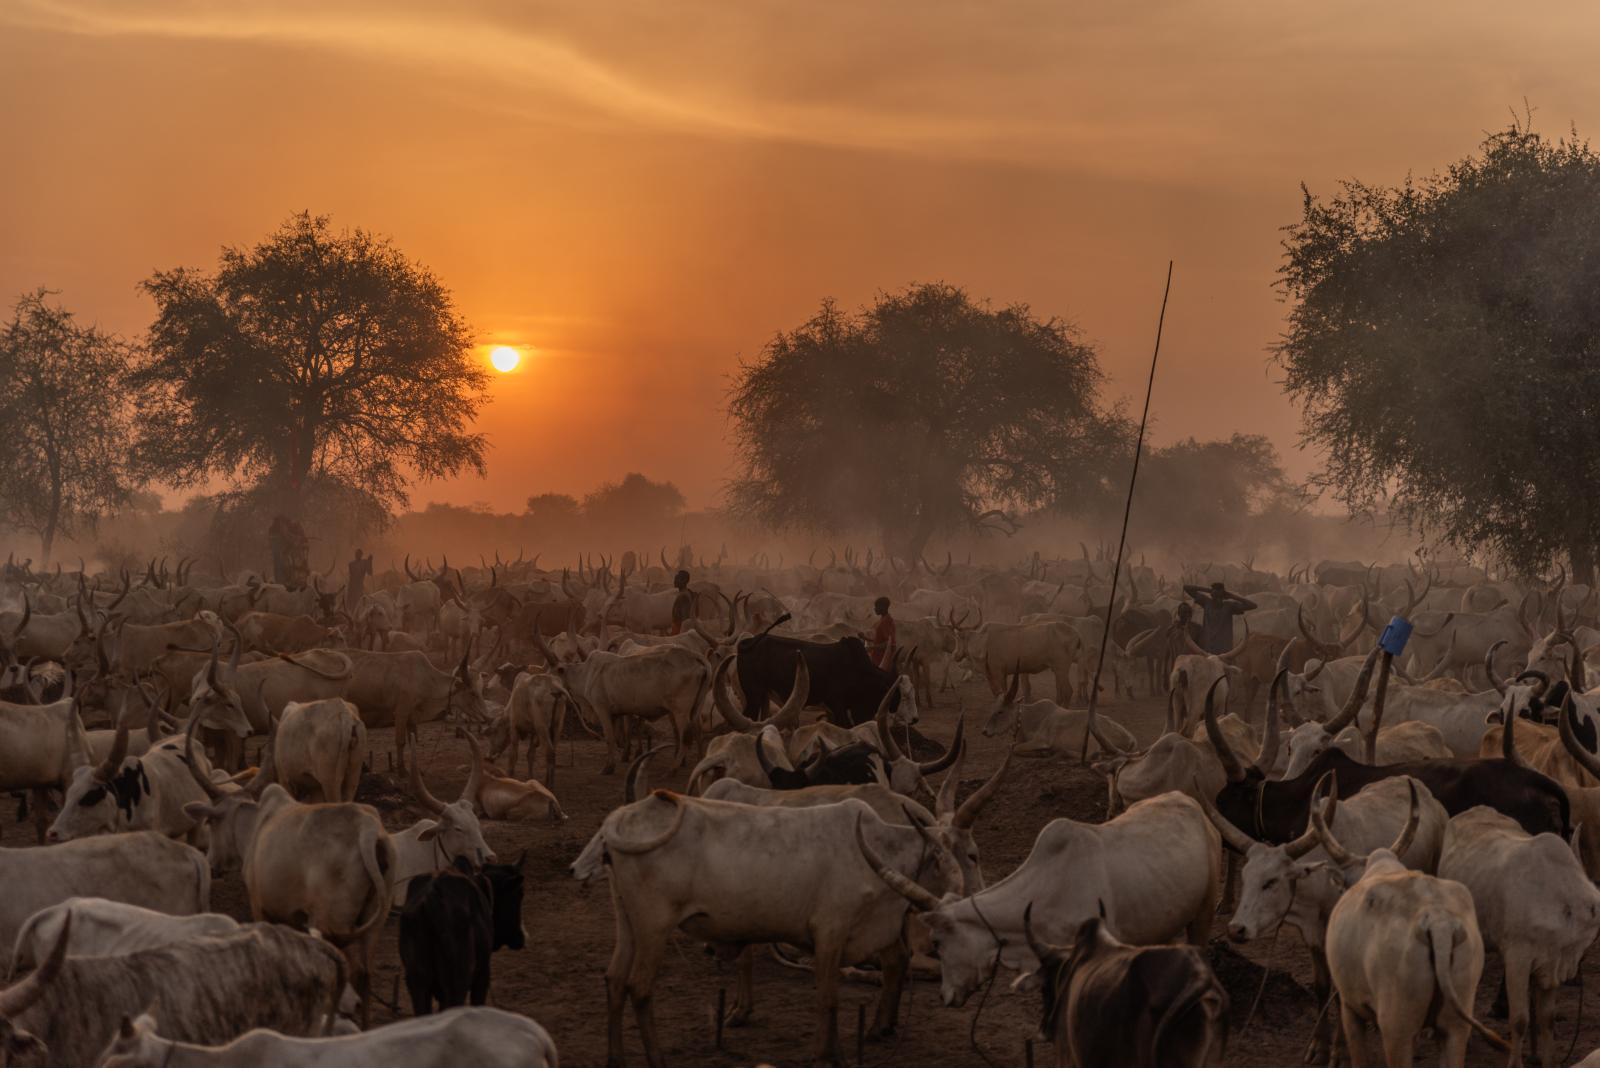  "Eco-Warriors of the Grasslands: The Sustainable Lifestyle of the Mundari Tribe" | Buy this image